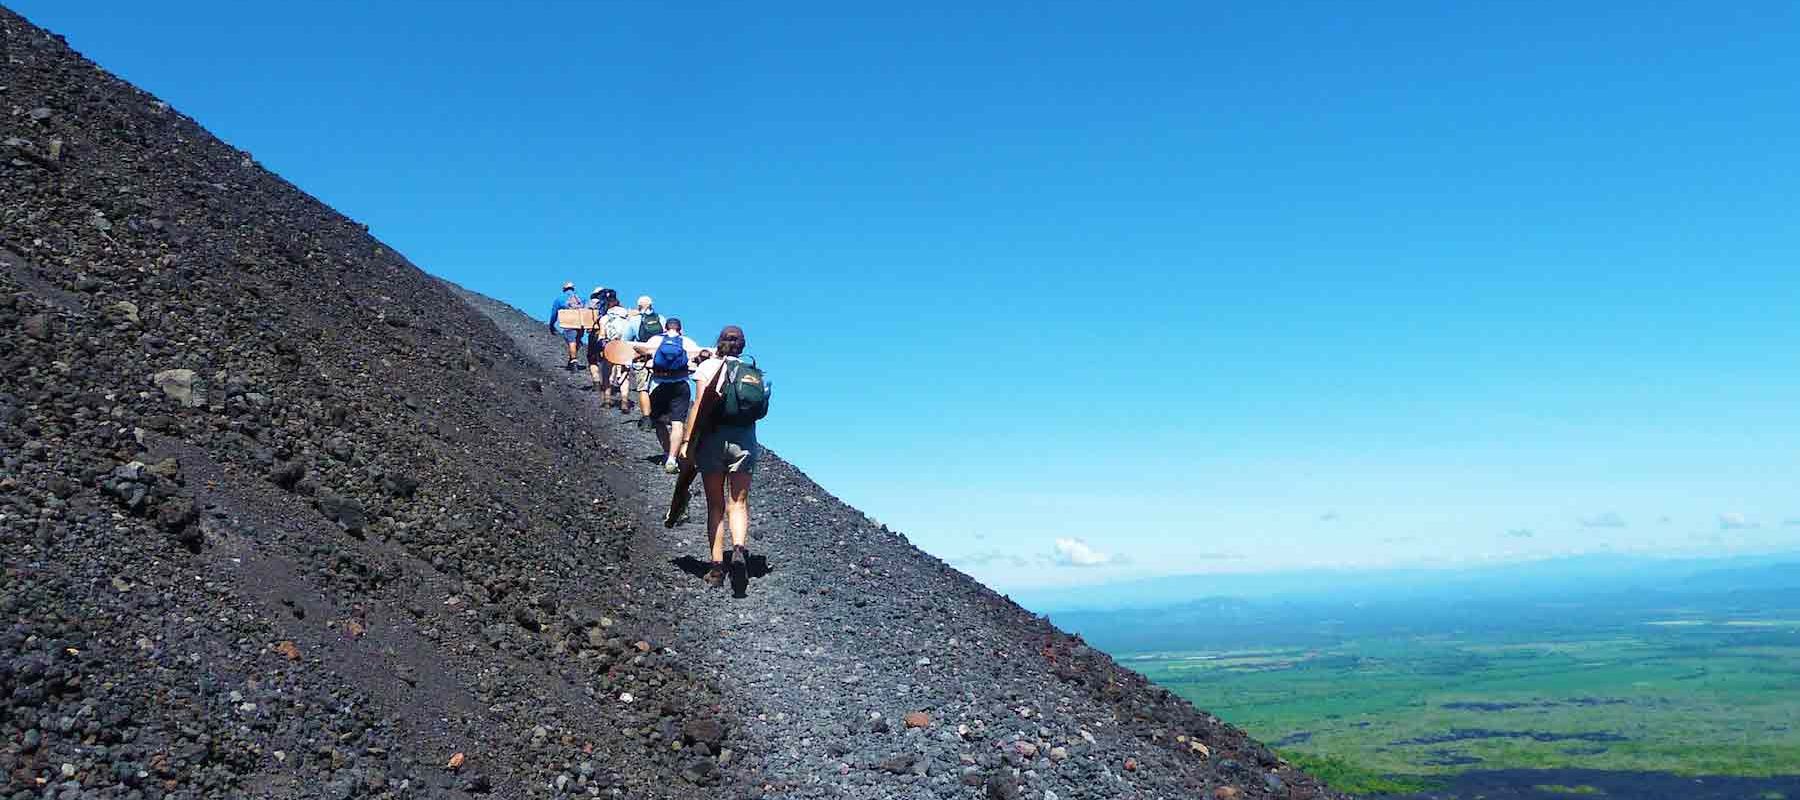 Hiking Tours and Vacations On Volcanoes in Nicaragua